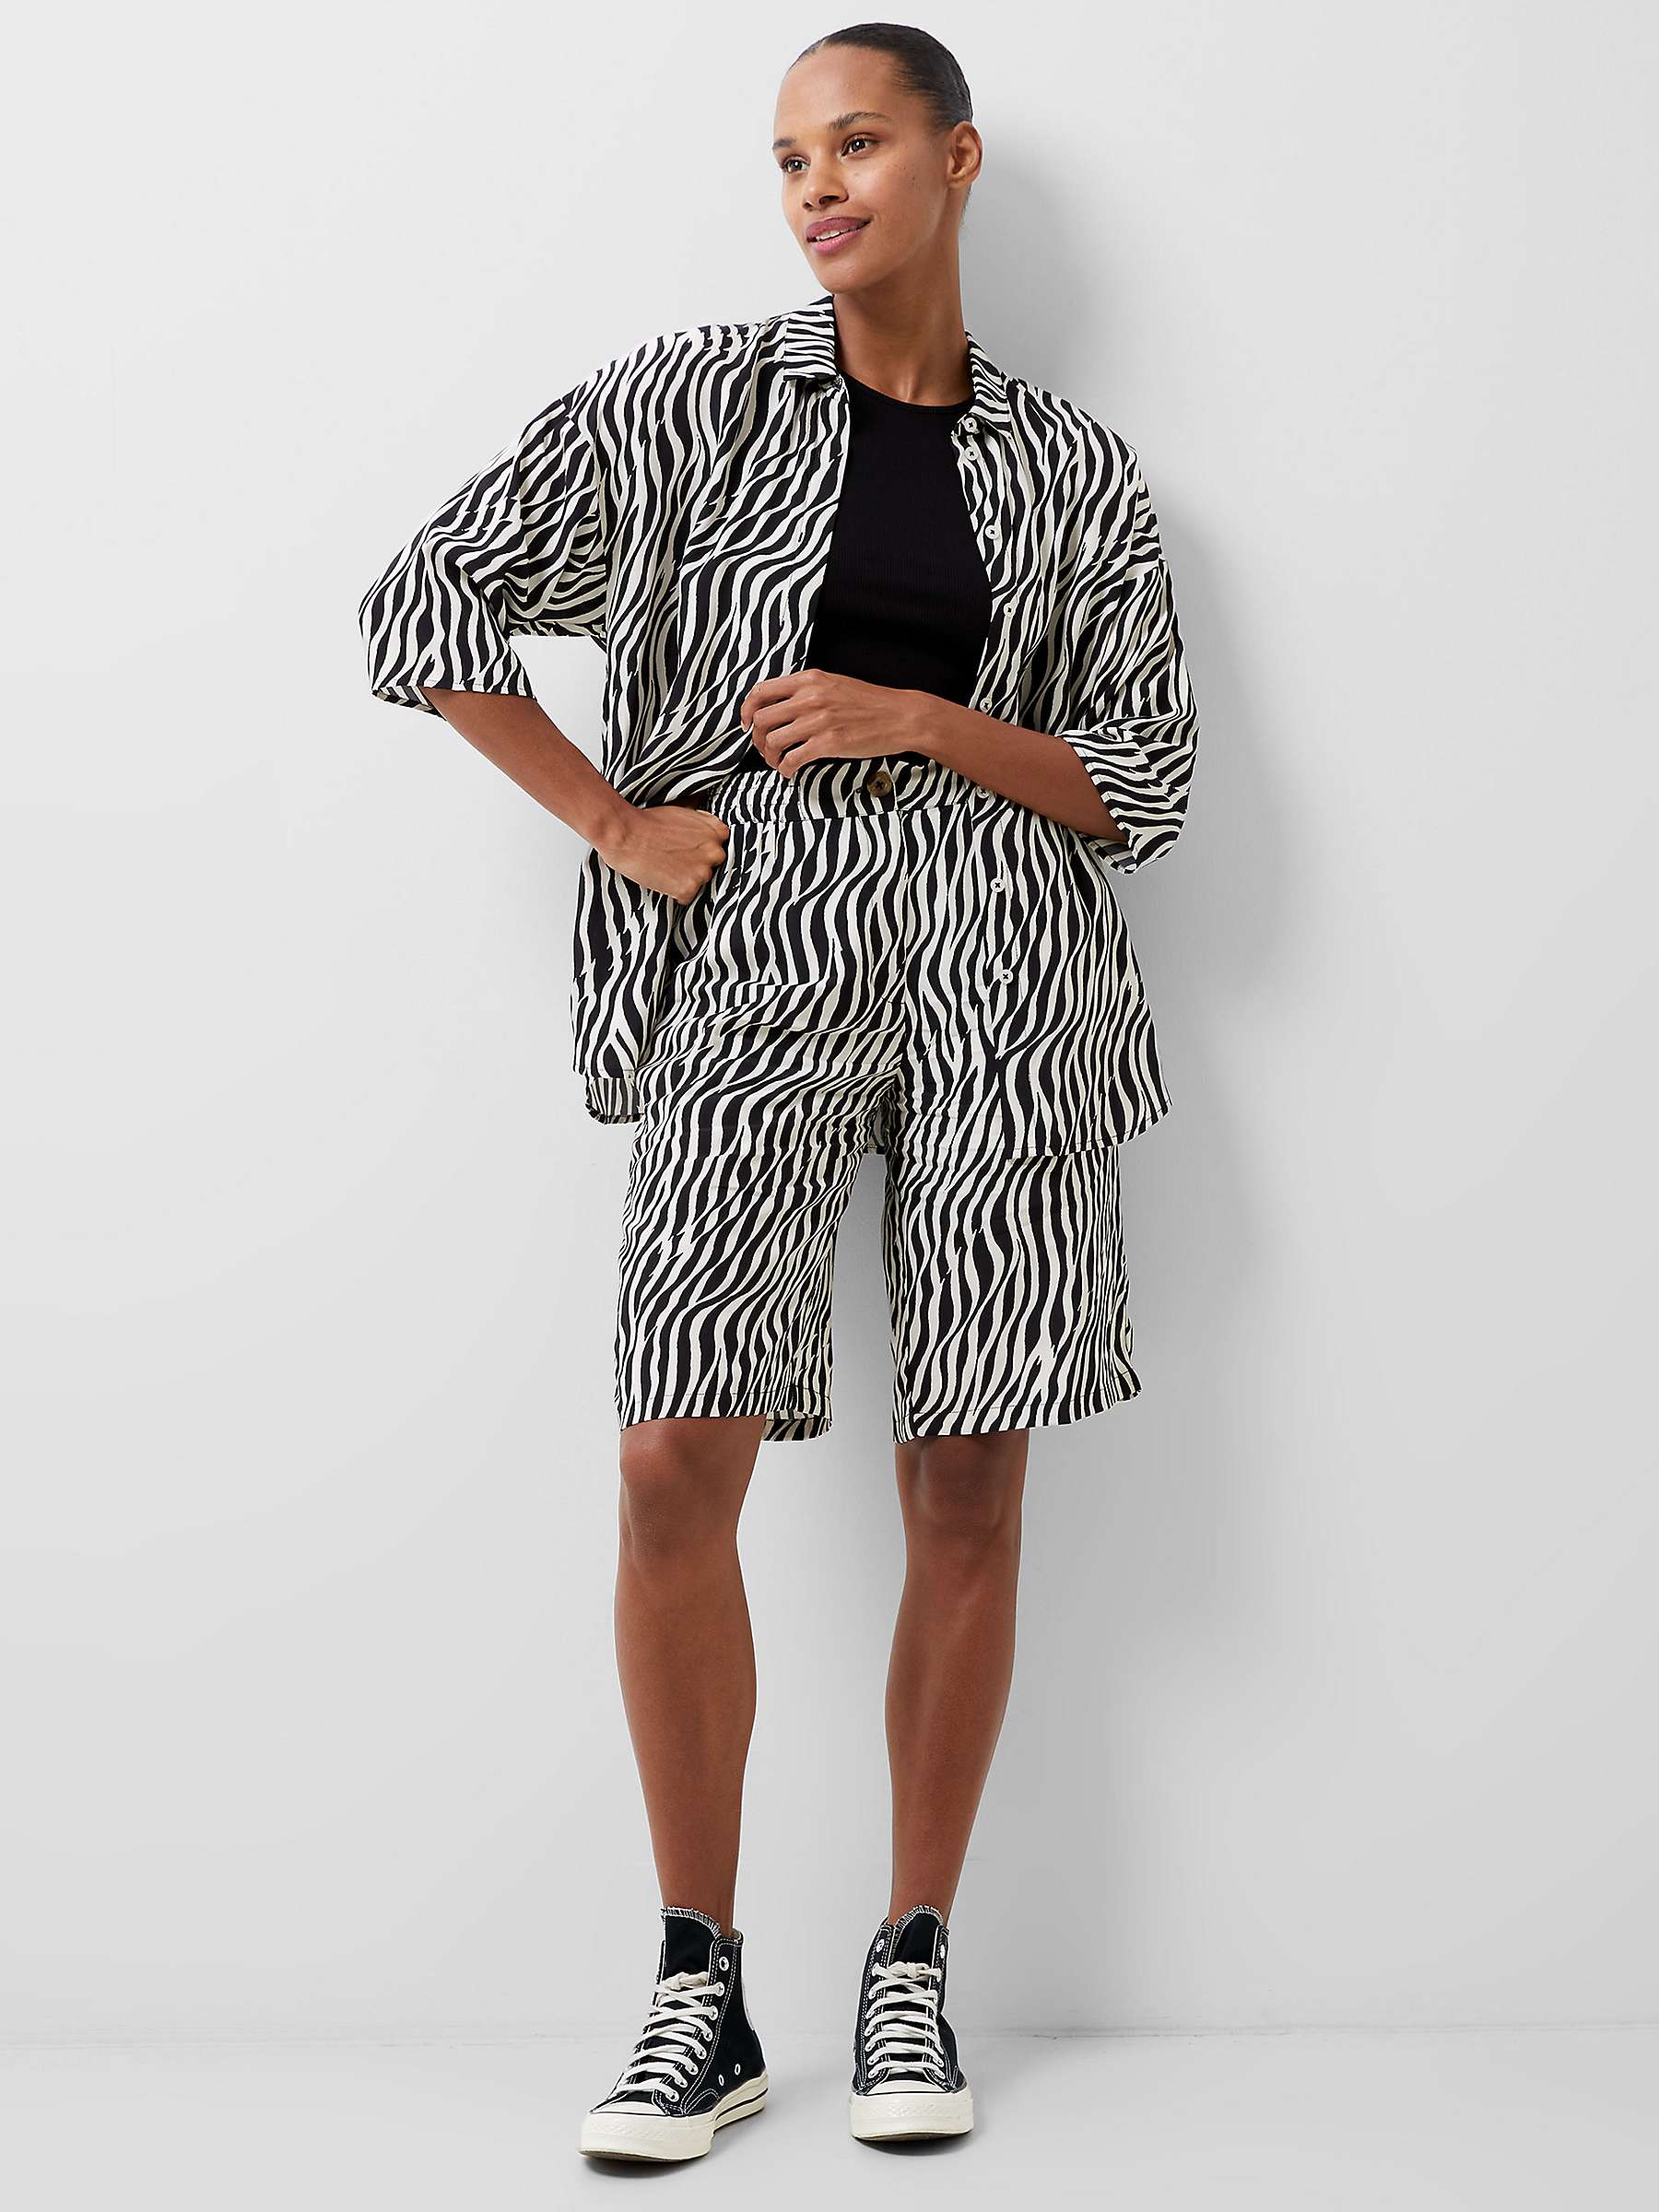 Buy French Connection Seine Delphine Abstract Print Shorts, Blackout/Classic White Online at johnlewis.com